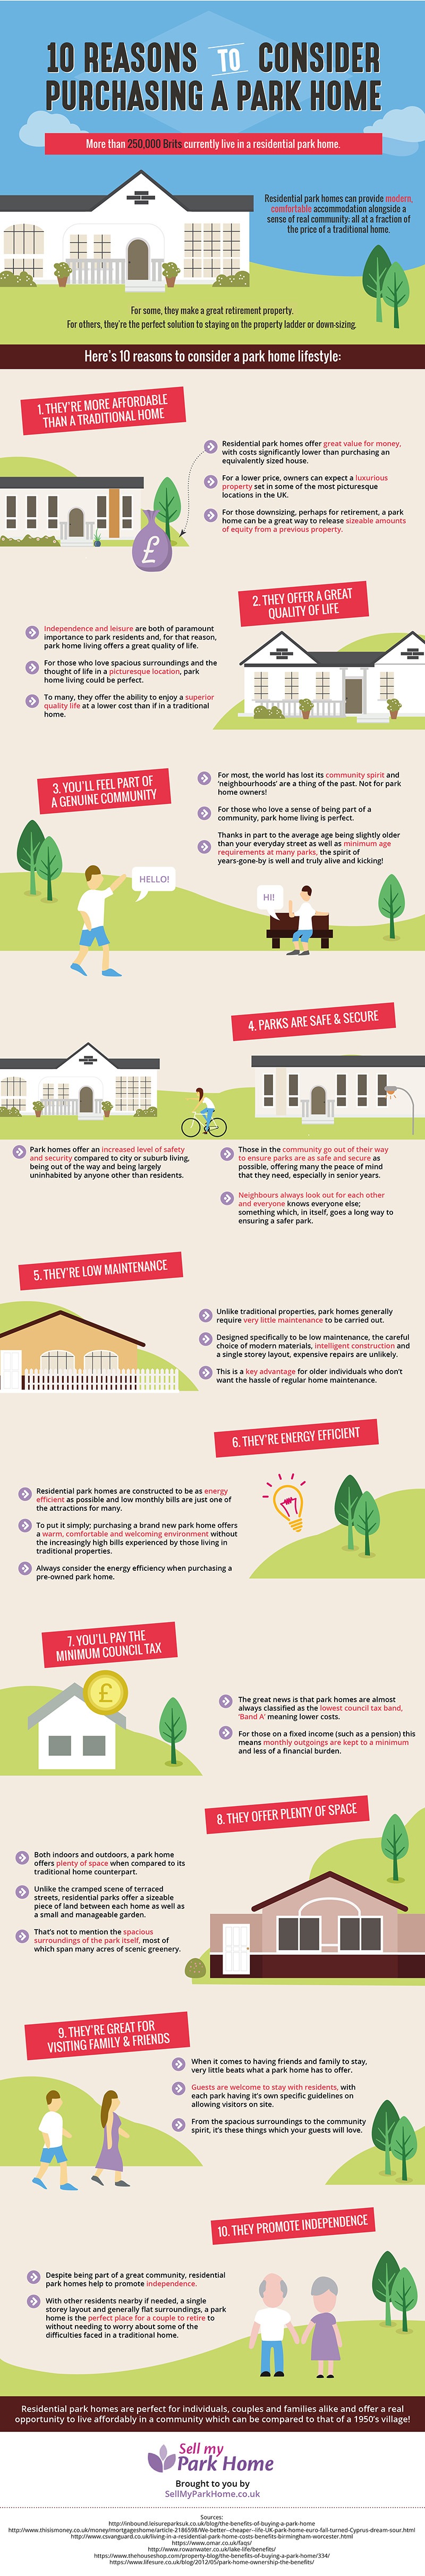 5 Reasons to Consider Downsizing to a Park Home